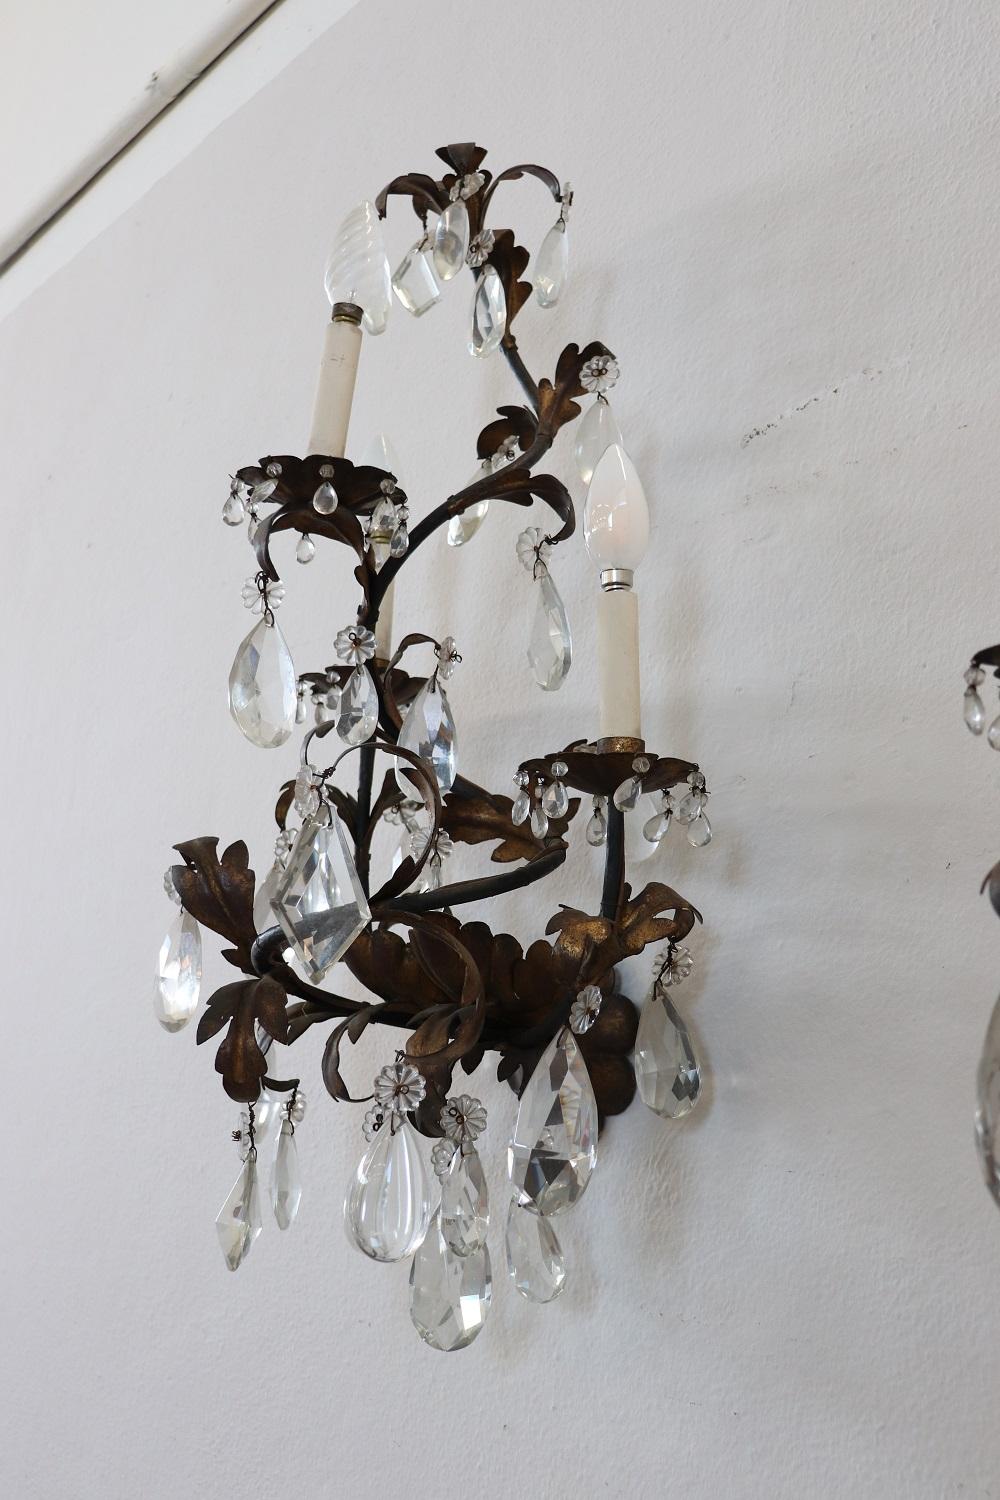 Late 19th Century 19th Century Wrought Iron and Crystal Drops Pair of Wall Lights or Sconces